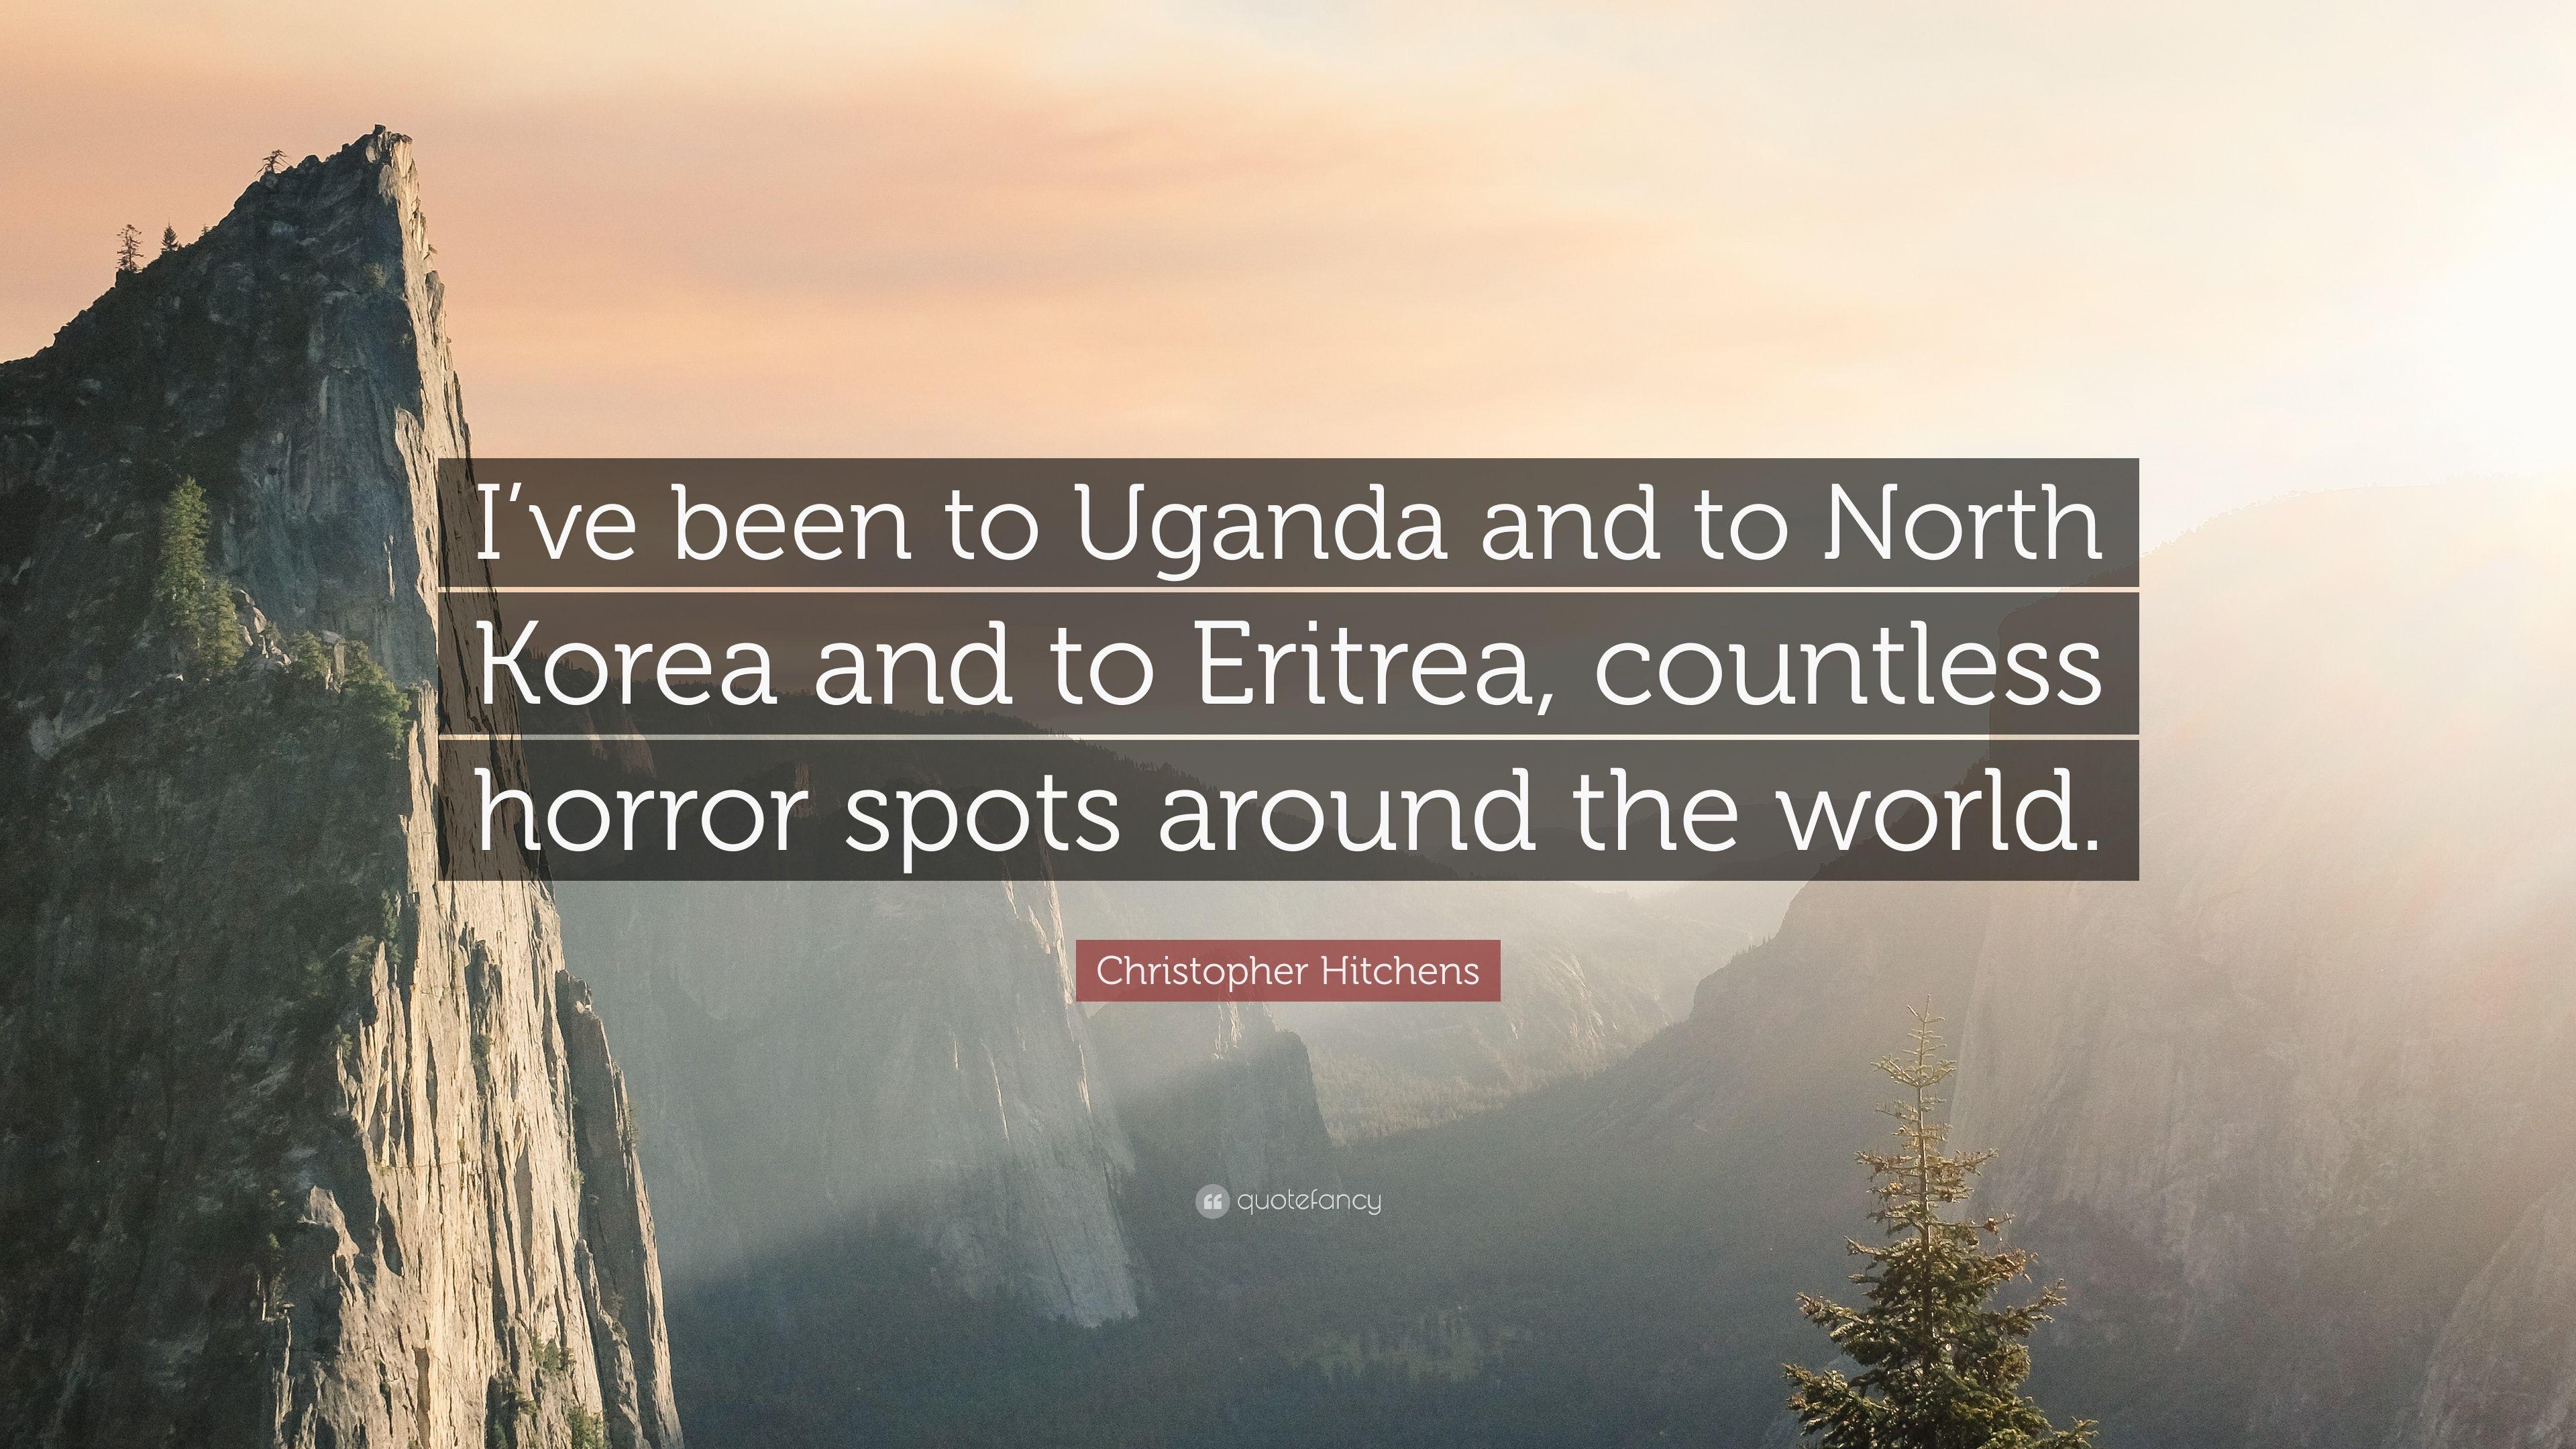 Christopher Hitchens Quote: “I've been to Uganda and to North Korea